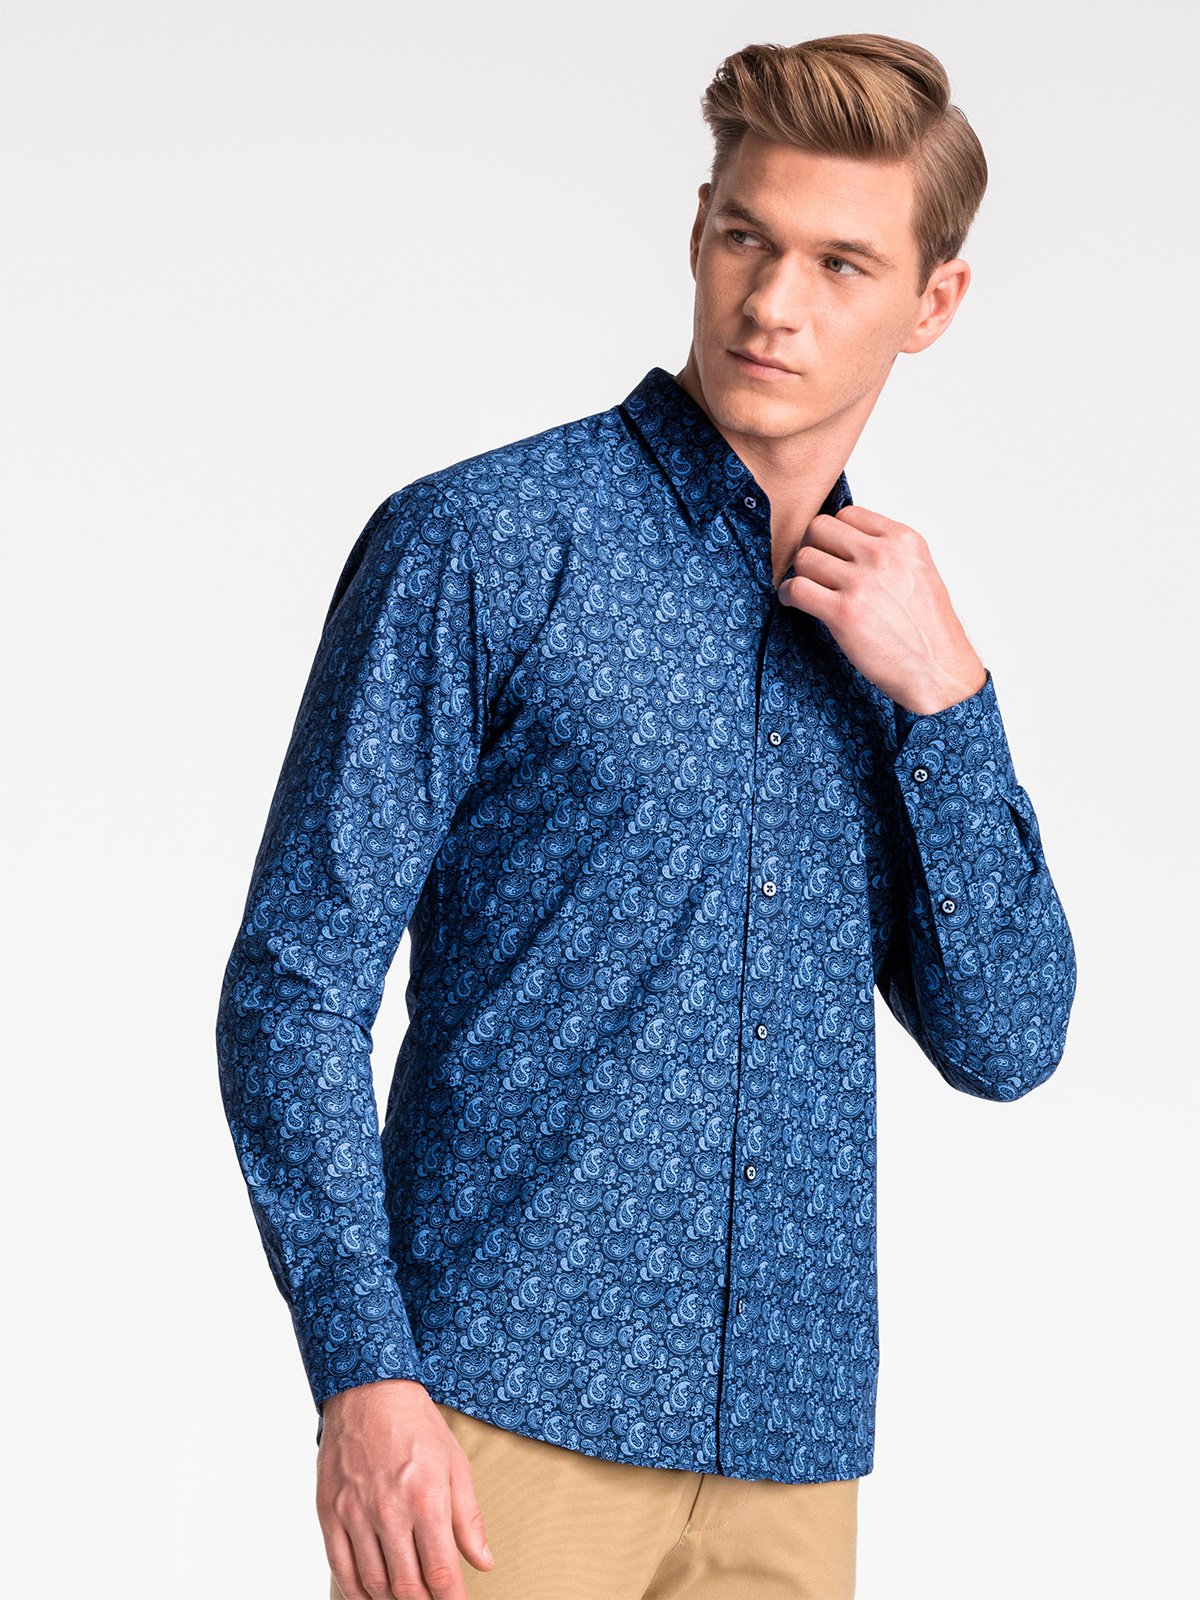 Men's shirt with long sleeves K476 - navy/blue | MODONE wholesale ...